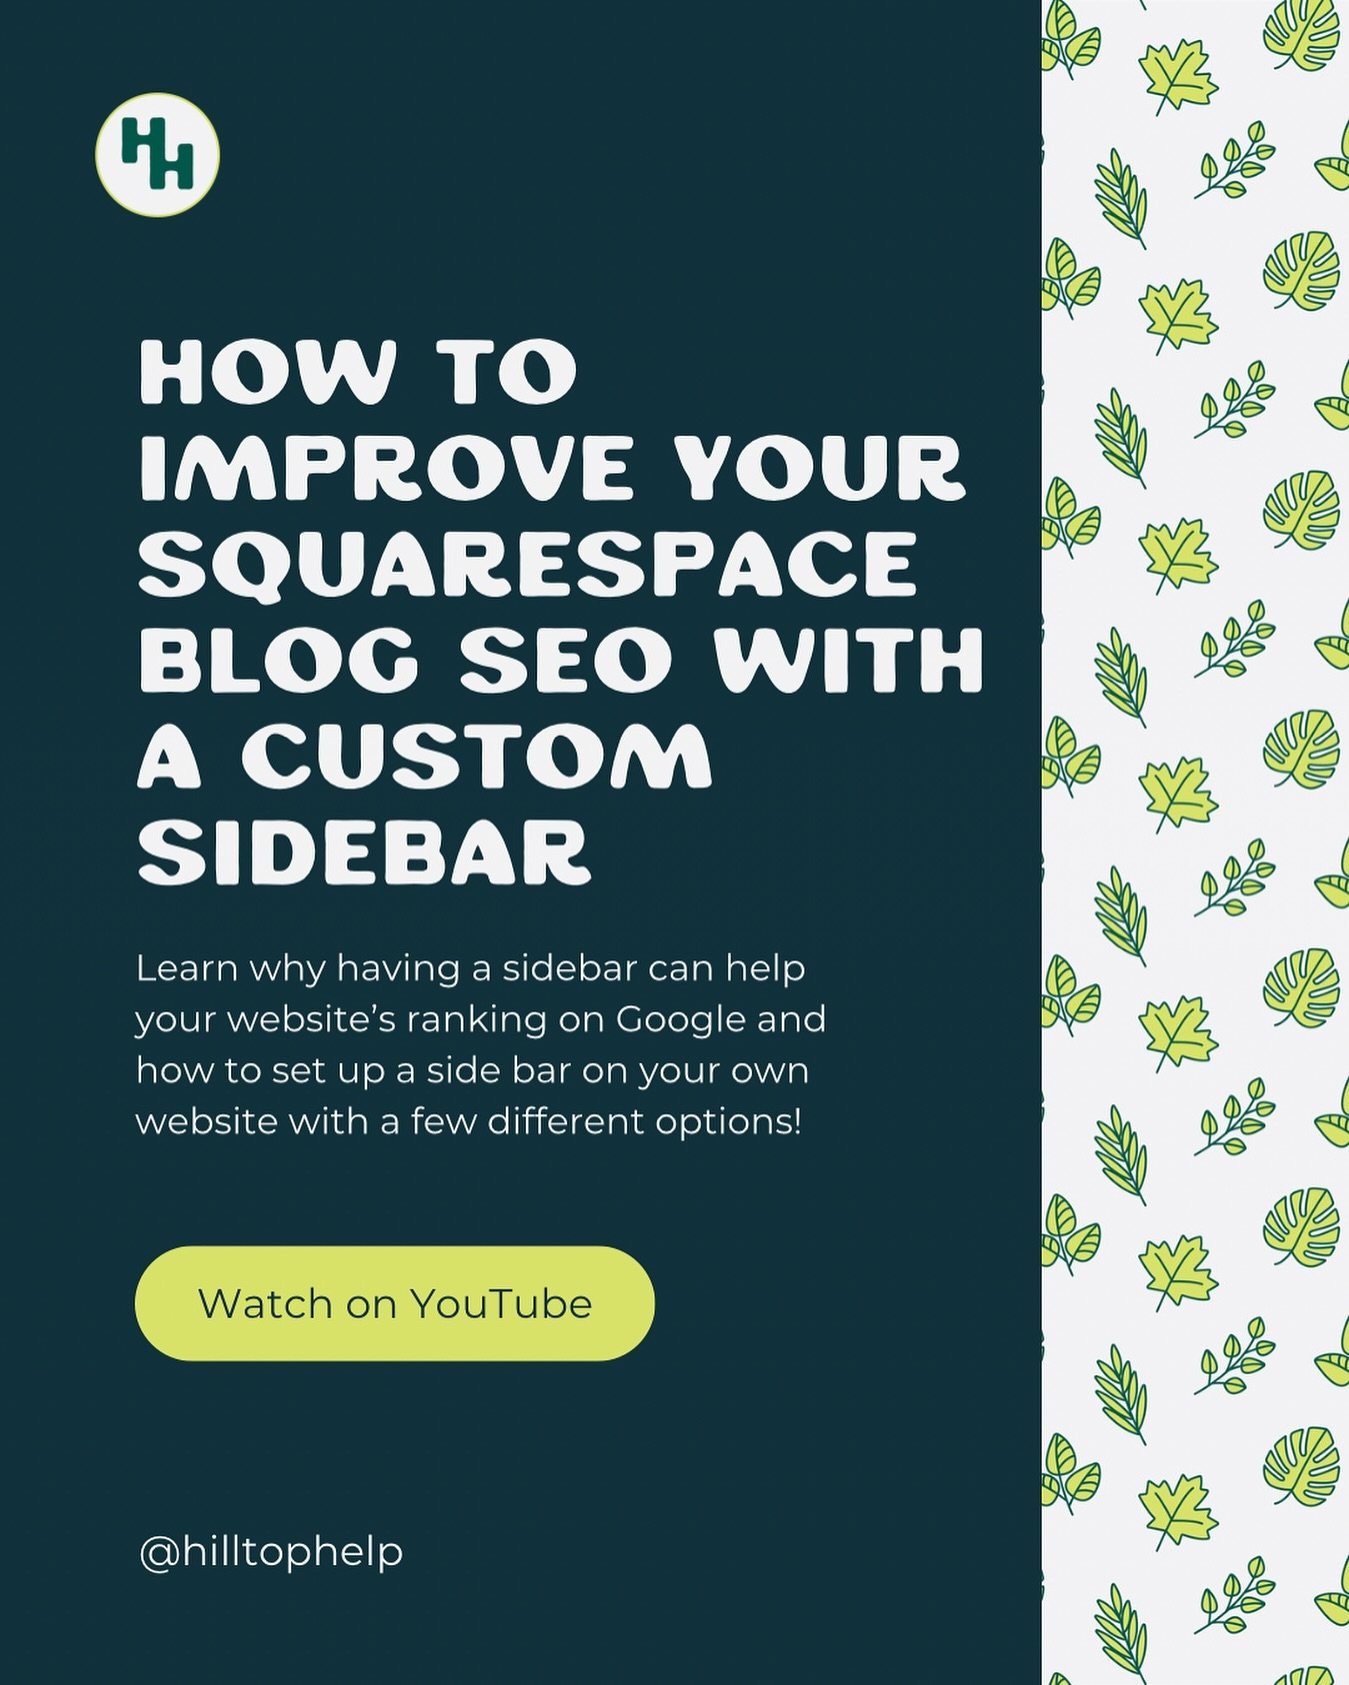 You asked so I delivered! Learn the SEO benefits of adding a sidebar to your Squarespace blog and follow a quick tutorial to create one with your own branding! Sharing the YouTube link in stories 💕💕 #squarespacetutorial #squarespace #squarespaceplu